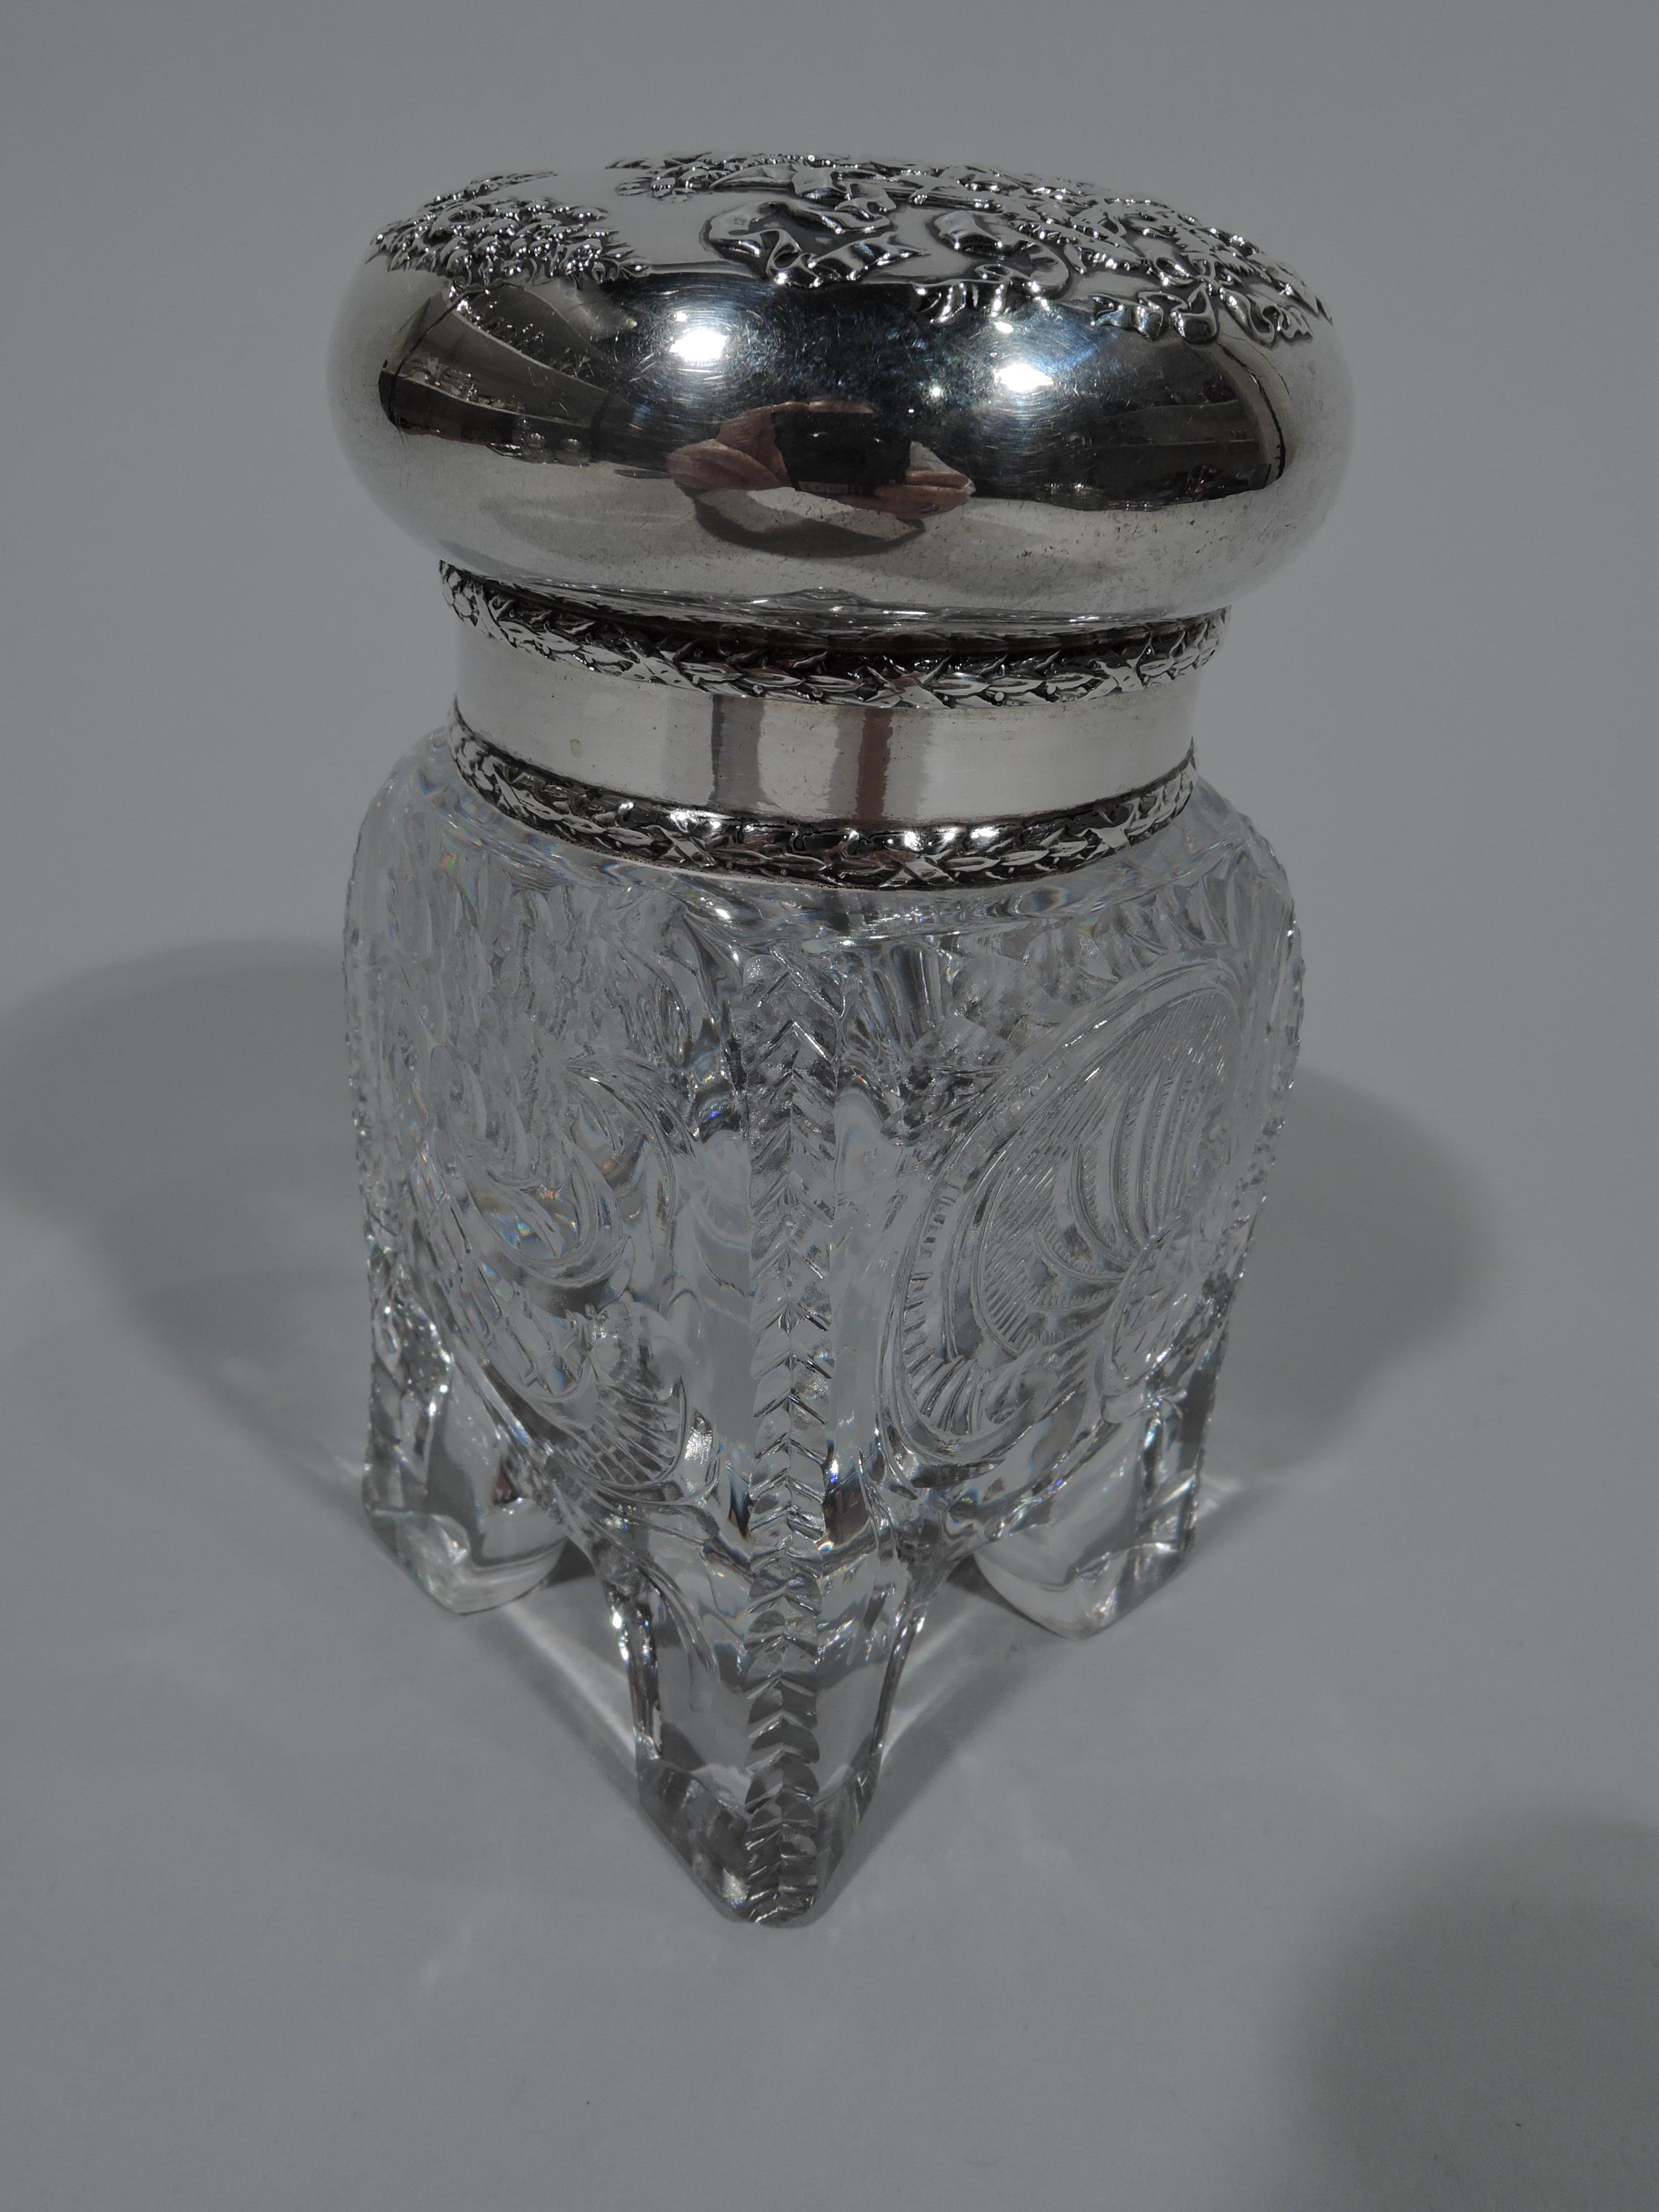 American sterling silver inkwell, circa 1880. Four gently curved sides on corner block supports. Cut ornament including scrolls, flowers, and chevrons. Sterling silver neck collar with imbricated leaf borders. Hinged bun cover same; top has chased